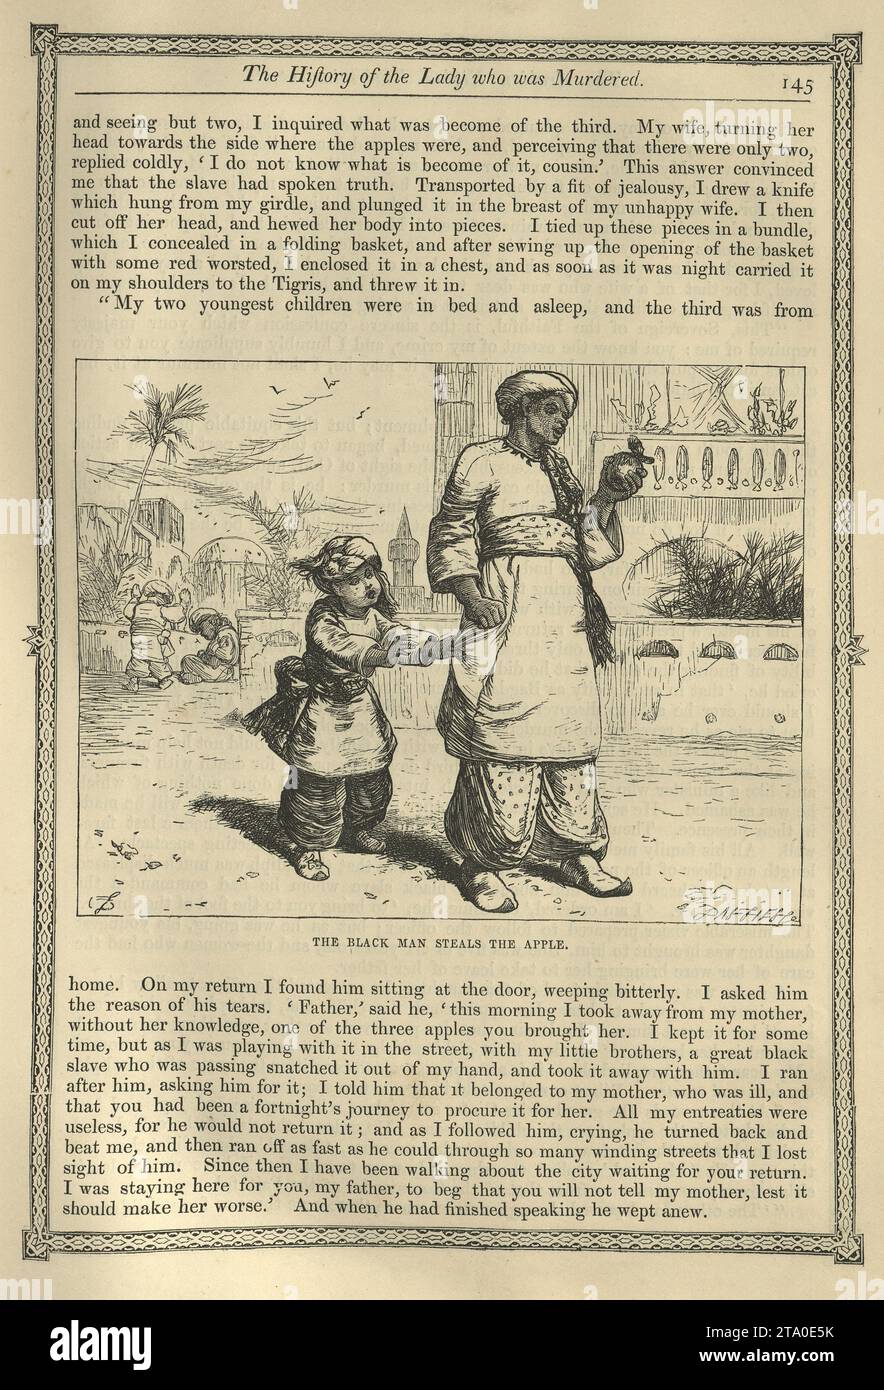 Vintage illustration One Thousand and One Nights, The black man steals the Apple, Arabian, Middle Eastern folktales, by The Brothers Dalziel. Stock Photo